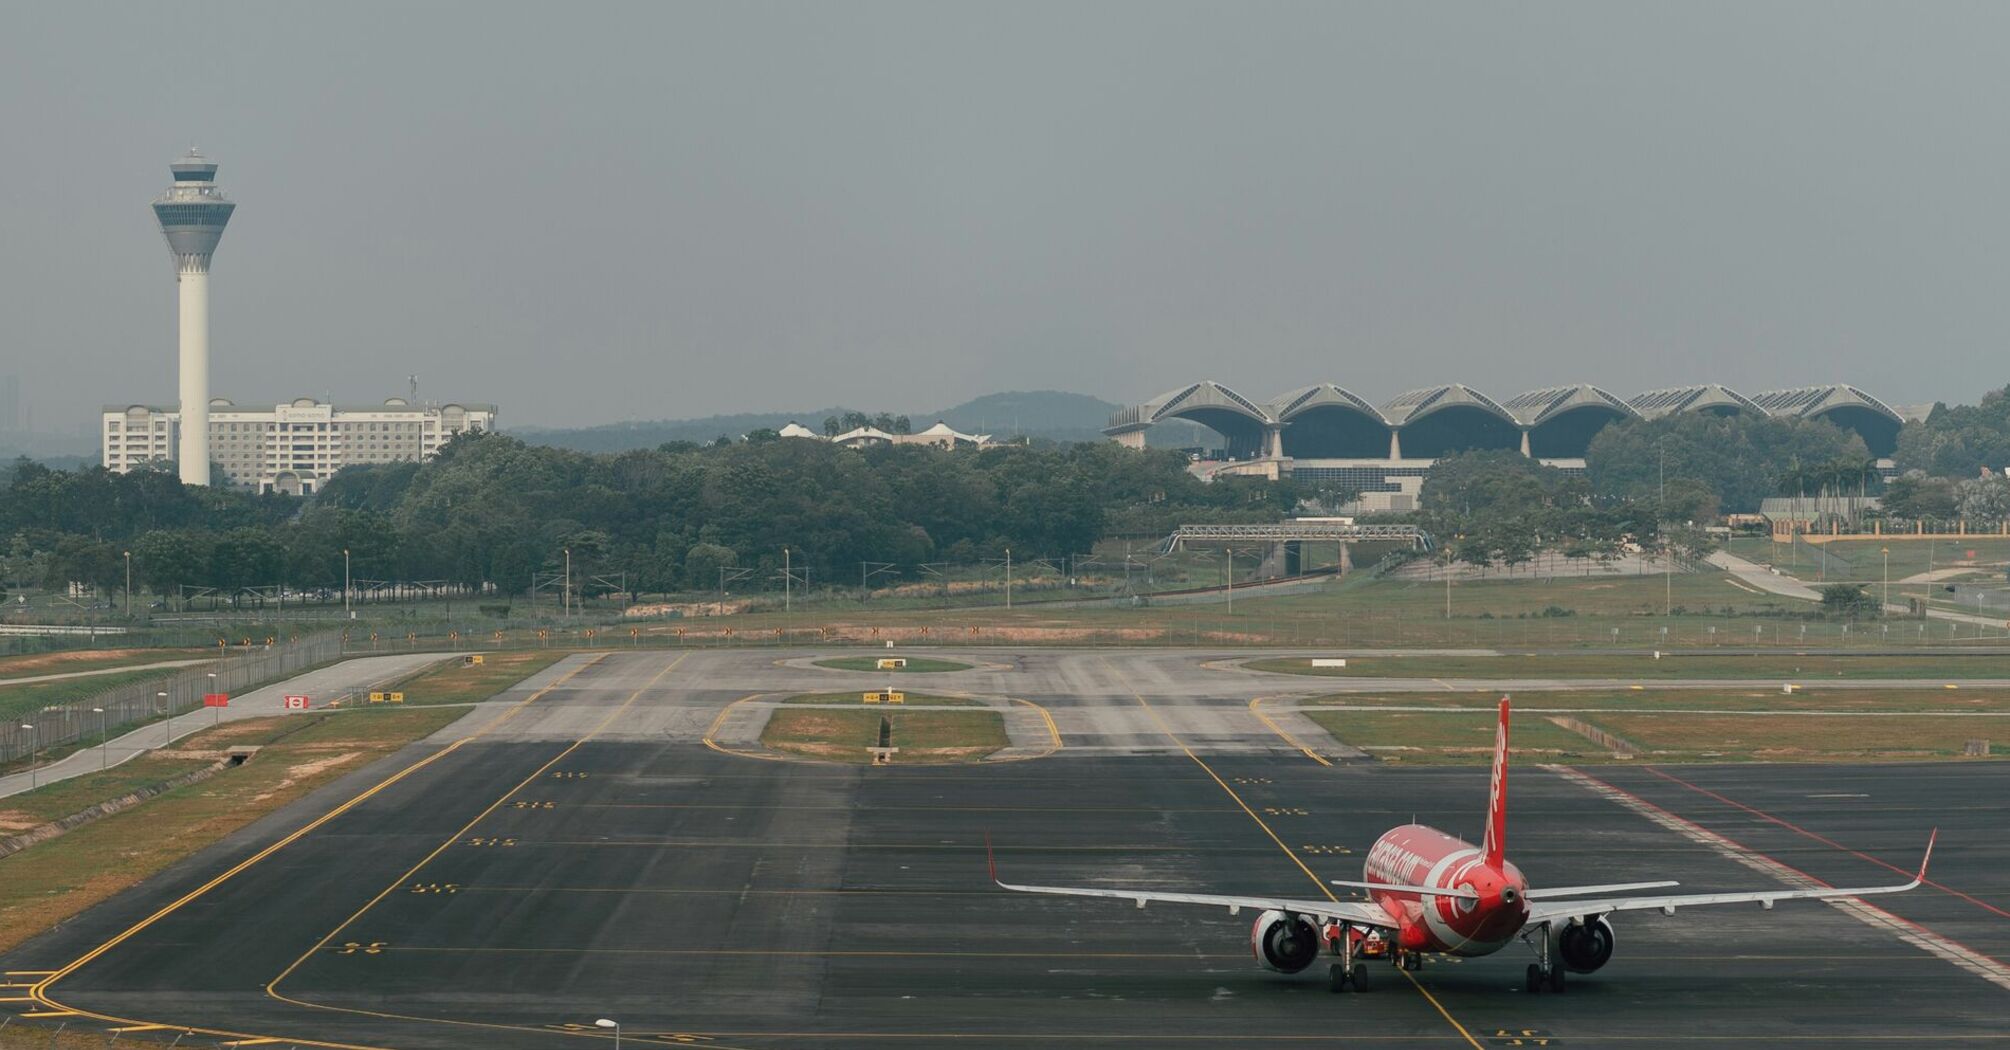 A red AirAsia airplane on a runway, with an airport control tower and terminal buildings in the background, set against a hazy sky 